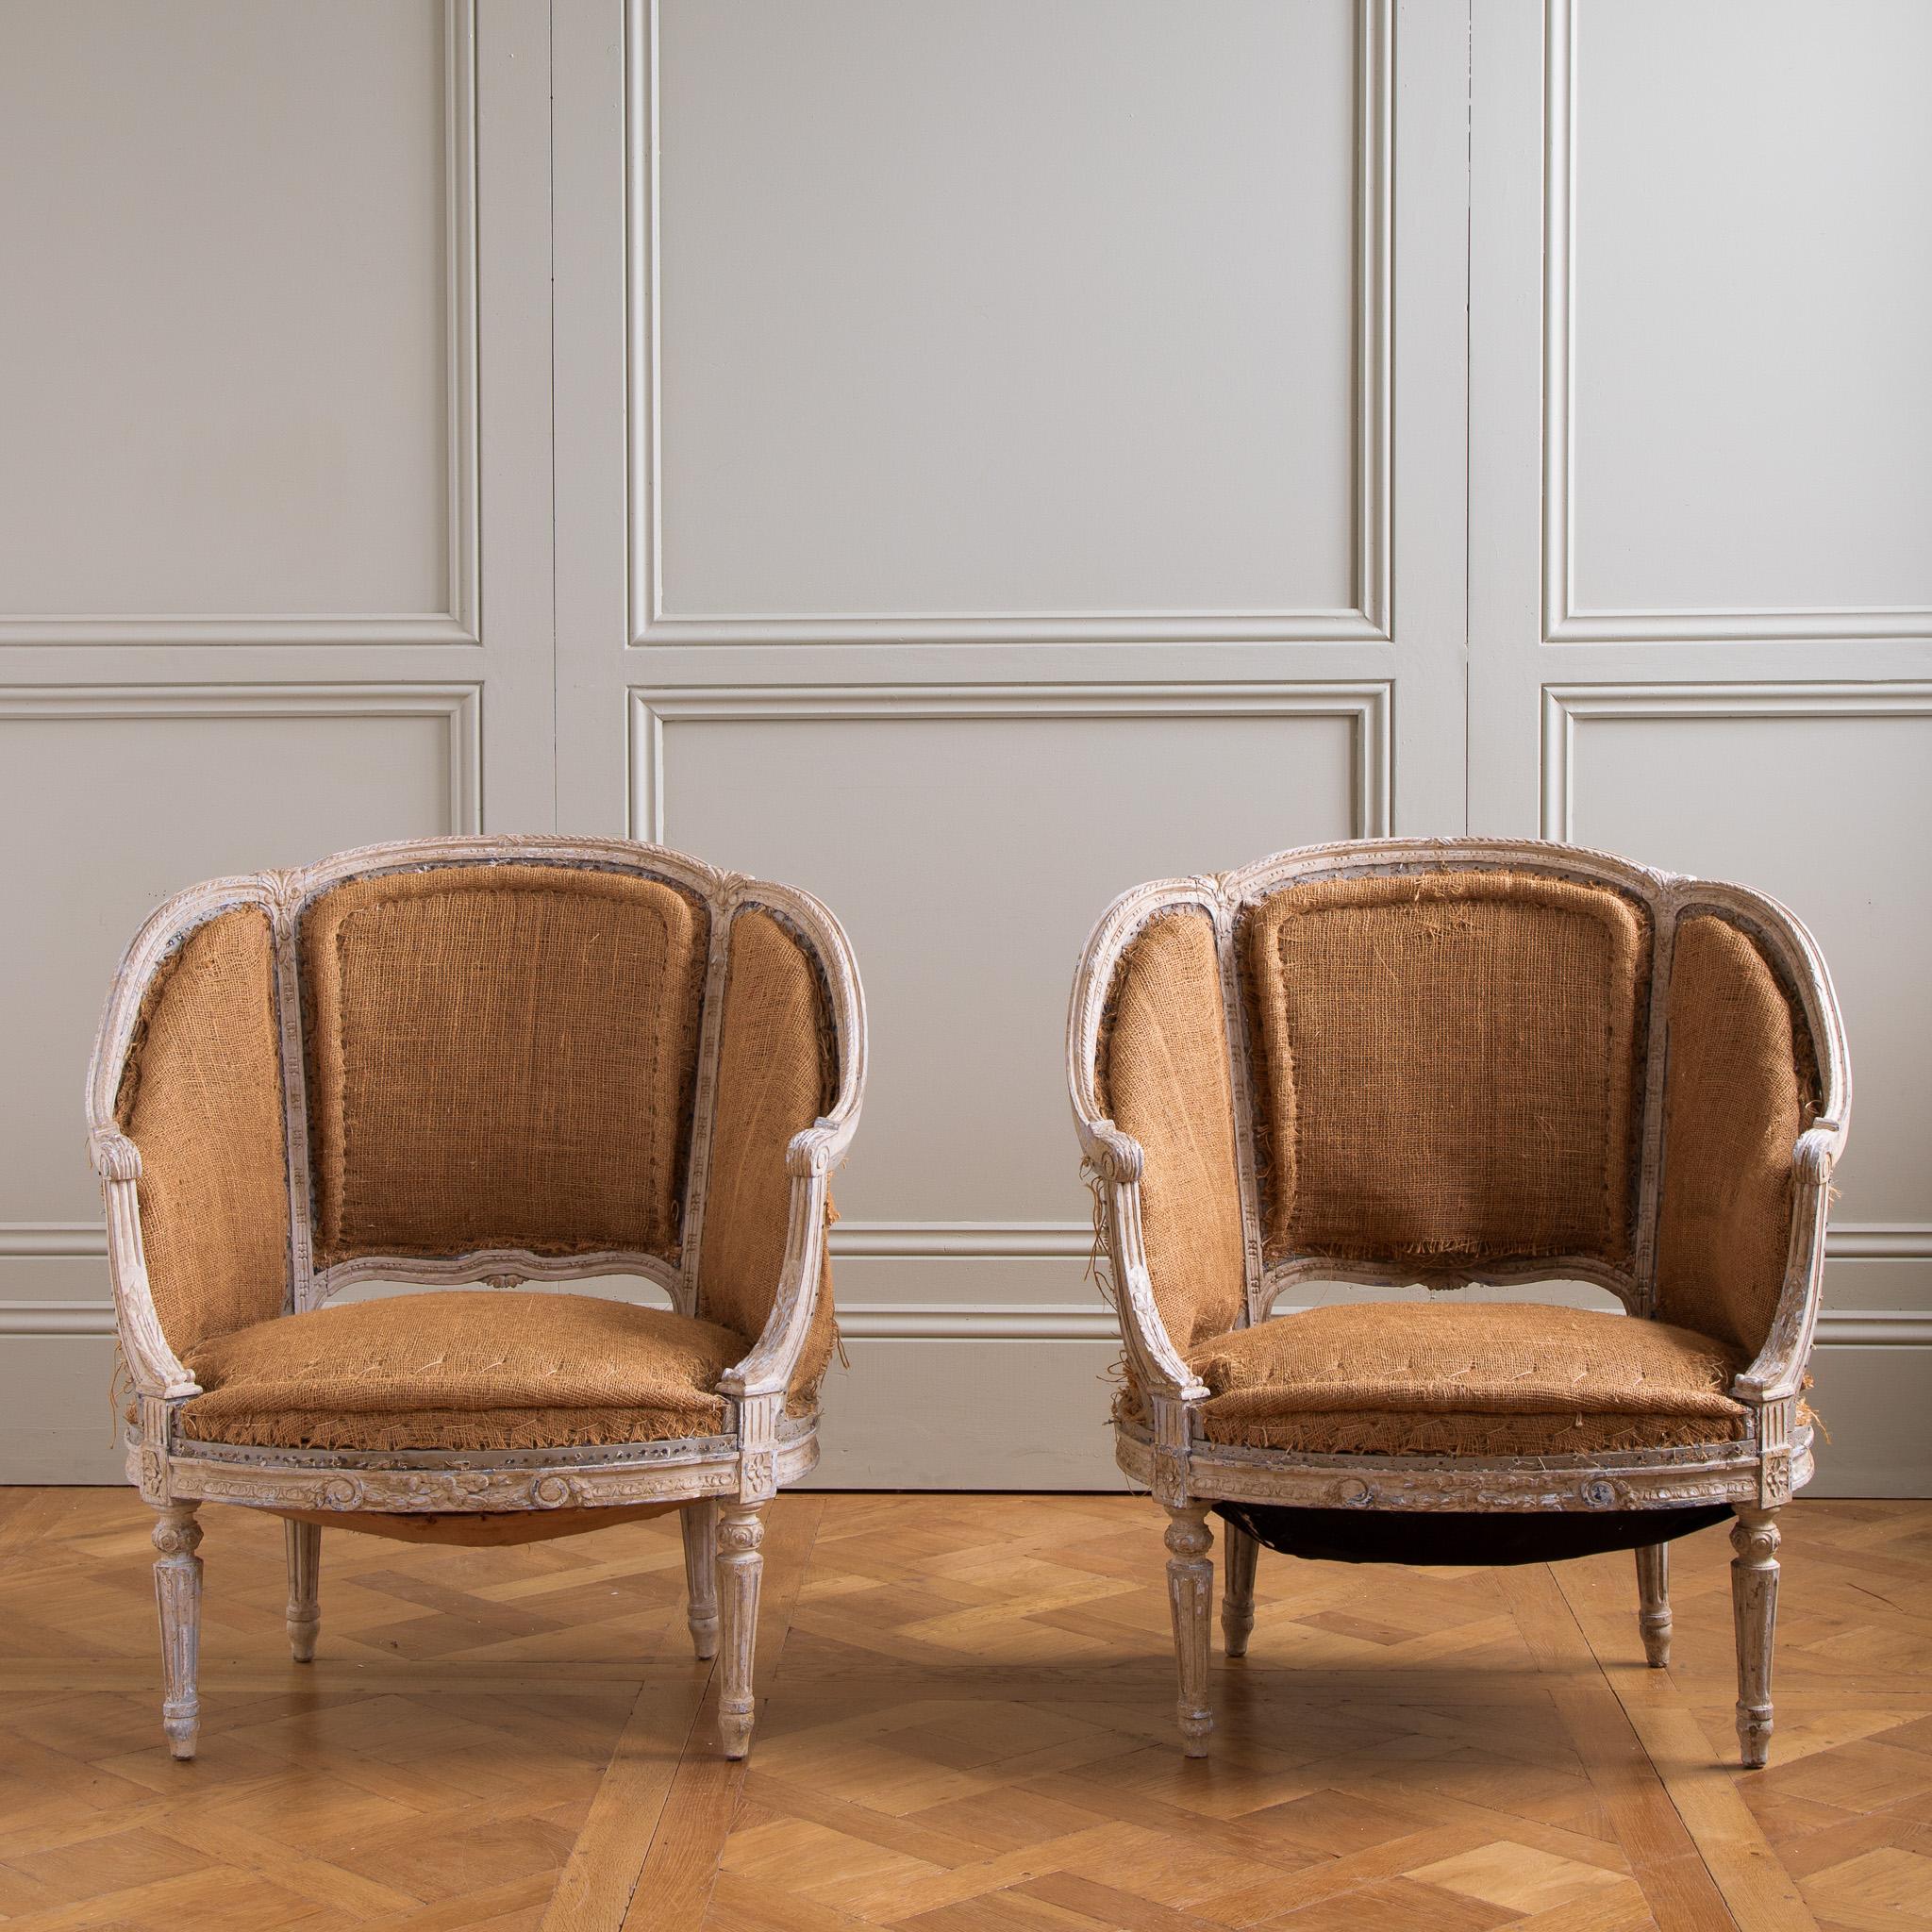 A rare find of exquisitely hand-carved  19th Century Corbeille Bergere, Louis XVI Style, French Armchairs, Circa 1800s. The Chairs have beautiful proportions with the attention to detailing of the period. The patina has a naturally age-distressed